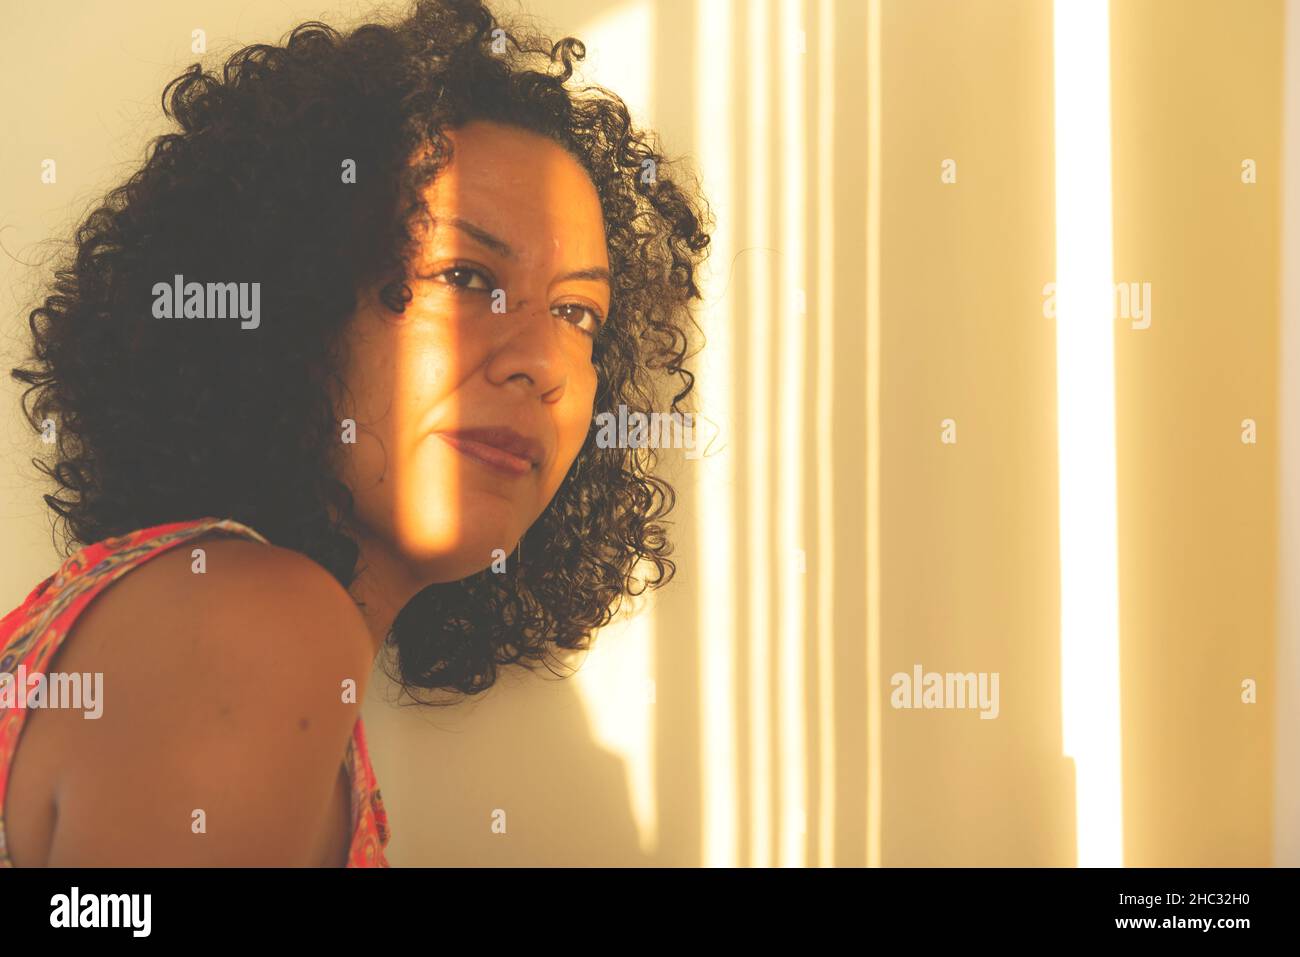 Portrait of a woman's face with light and shadows from the window. Salvador, Bahia, Brazil. Stock Photo